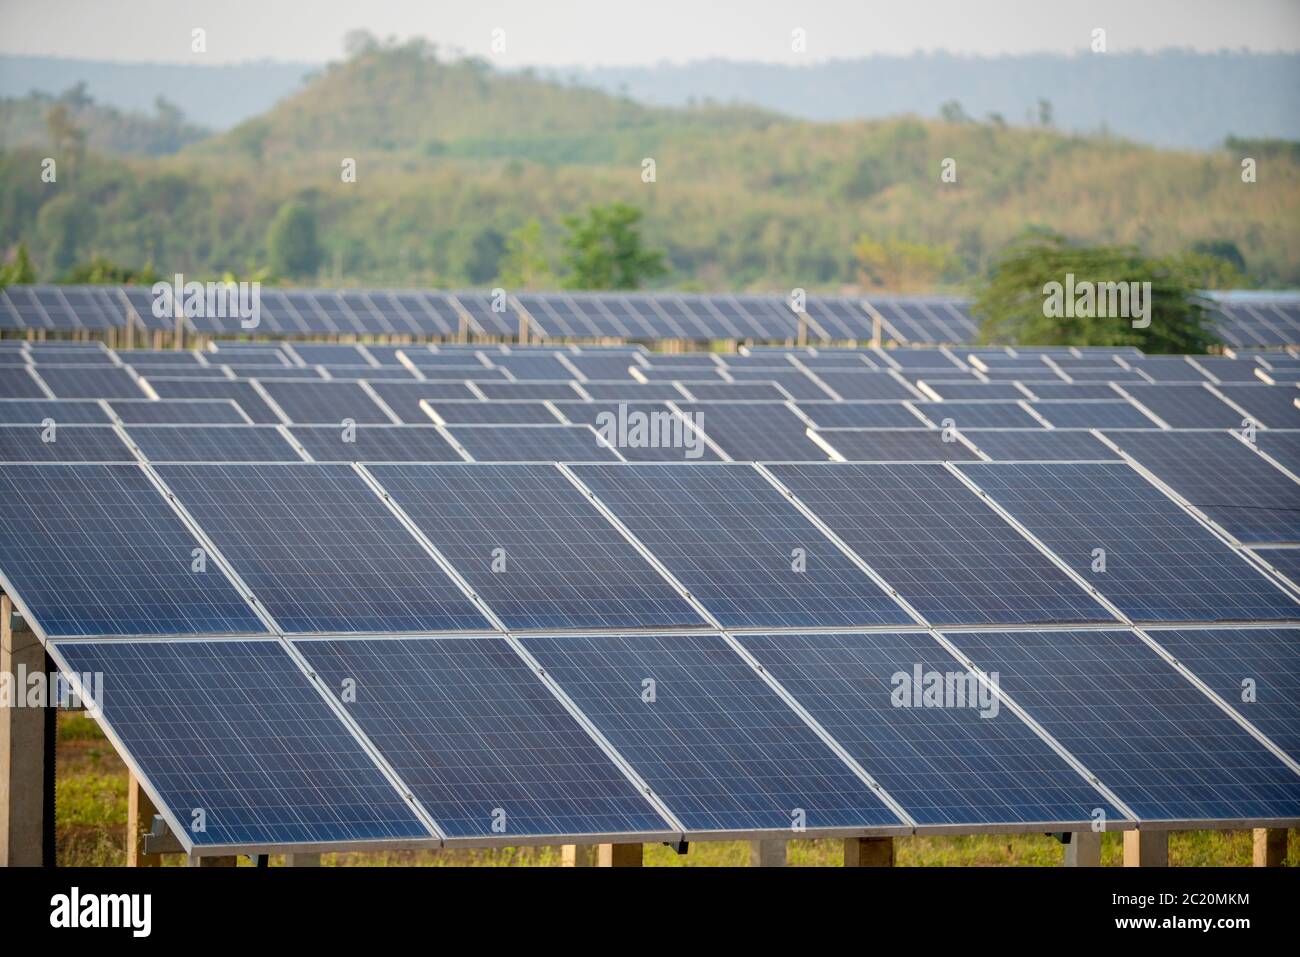 The photovoltaic cell in the solar panel farm Stock Photo